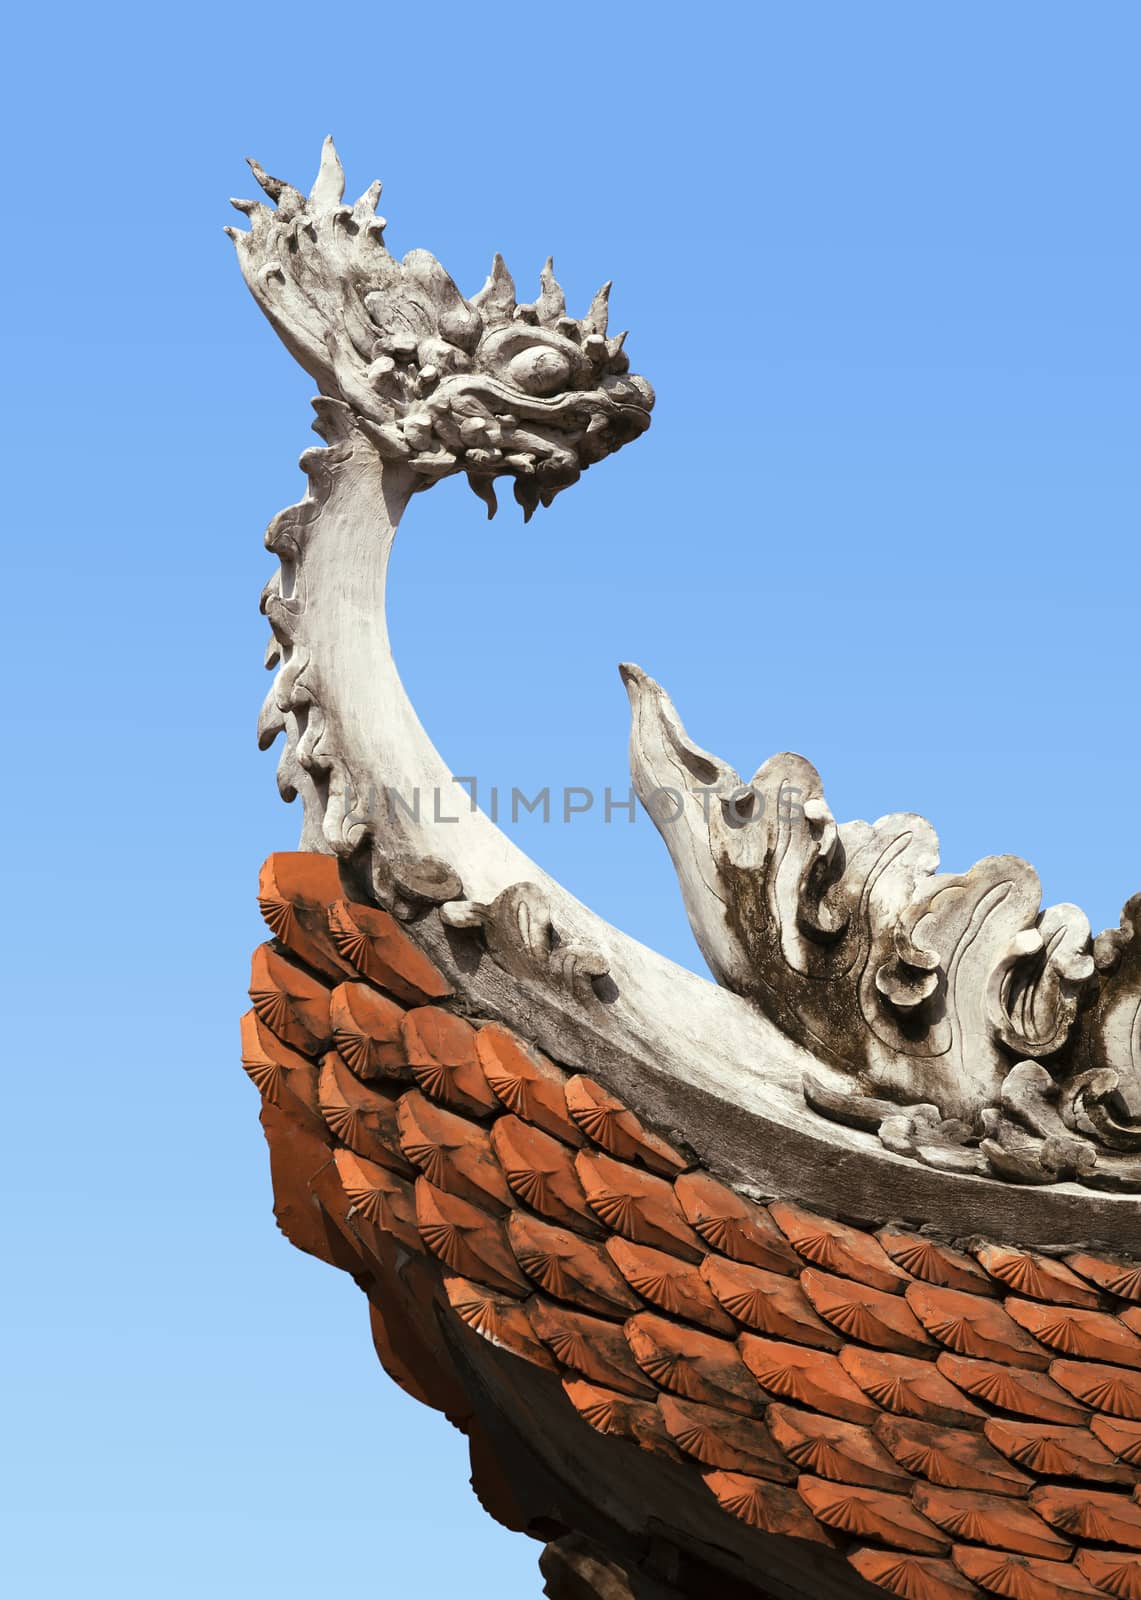 Decoration on a temple roof in Vietnam by Goodday